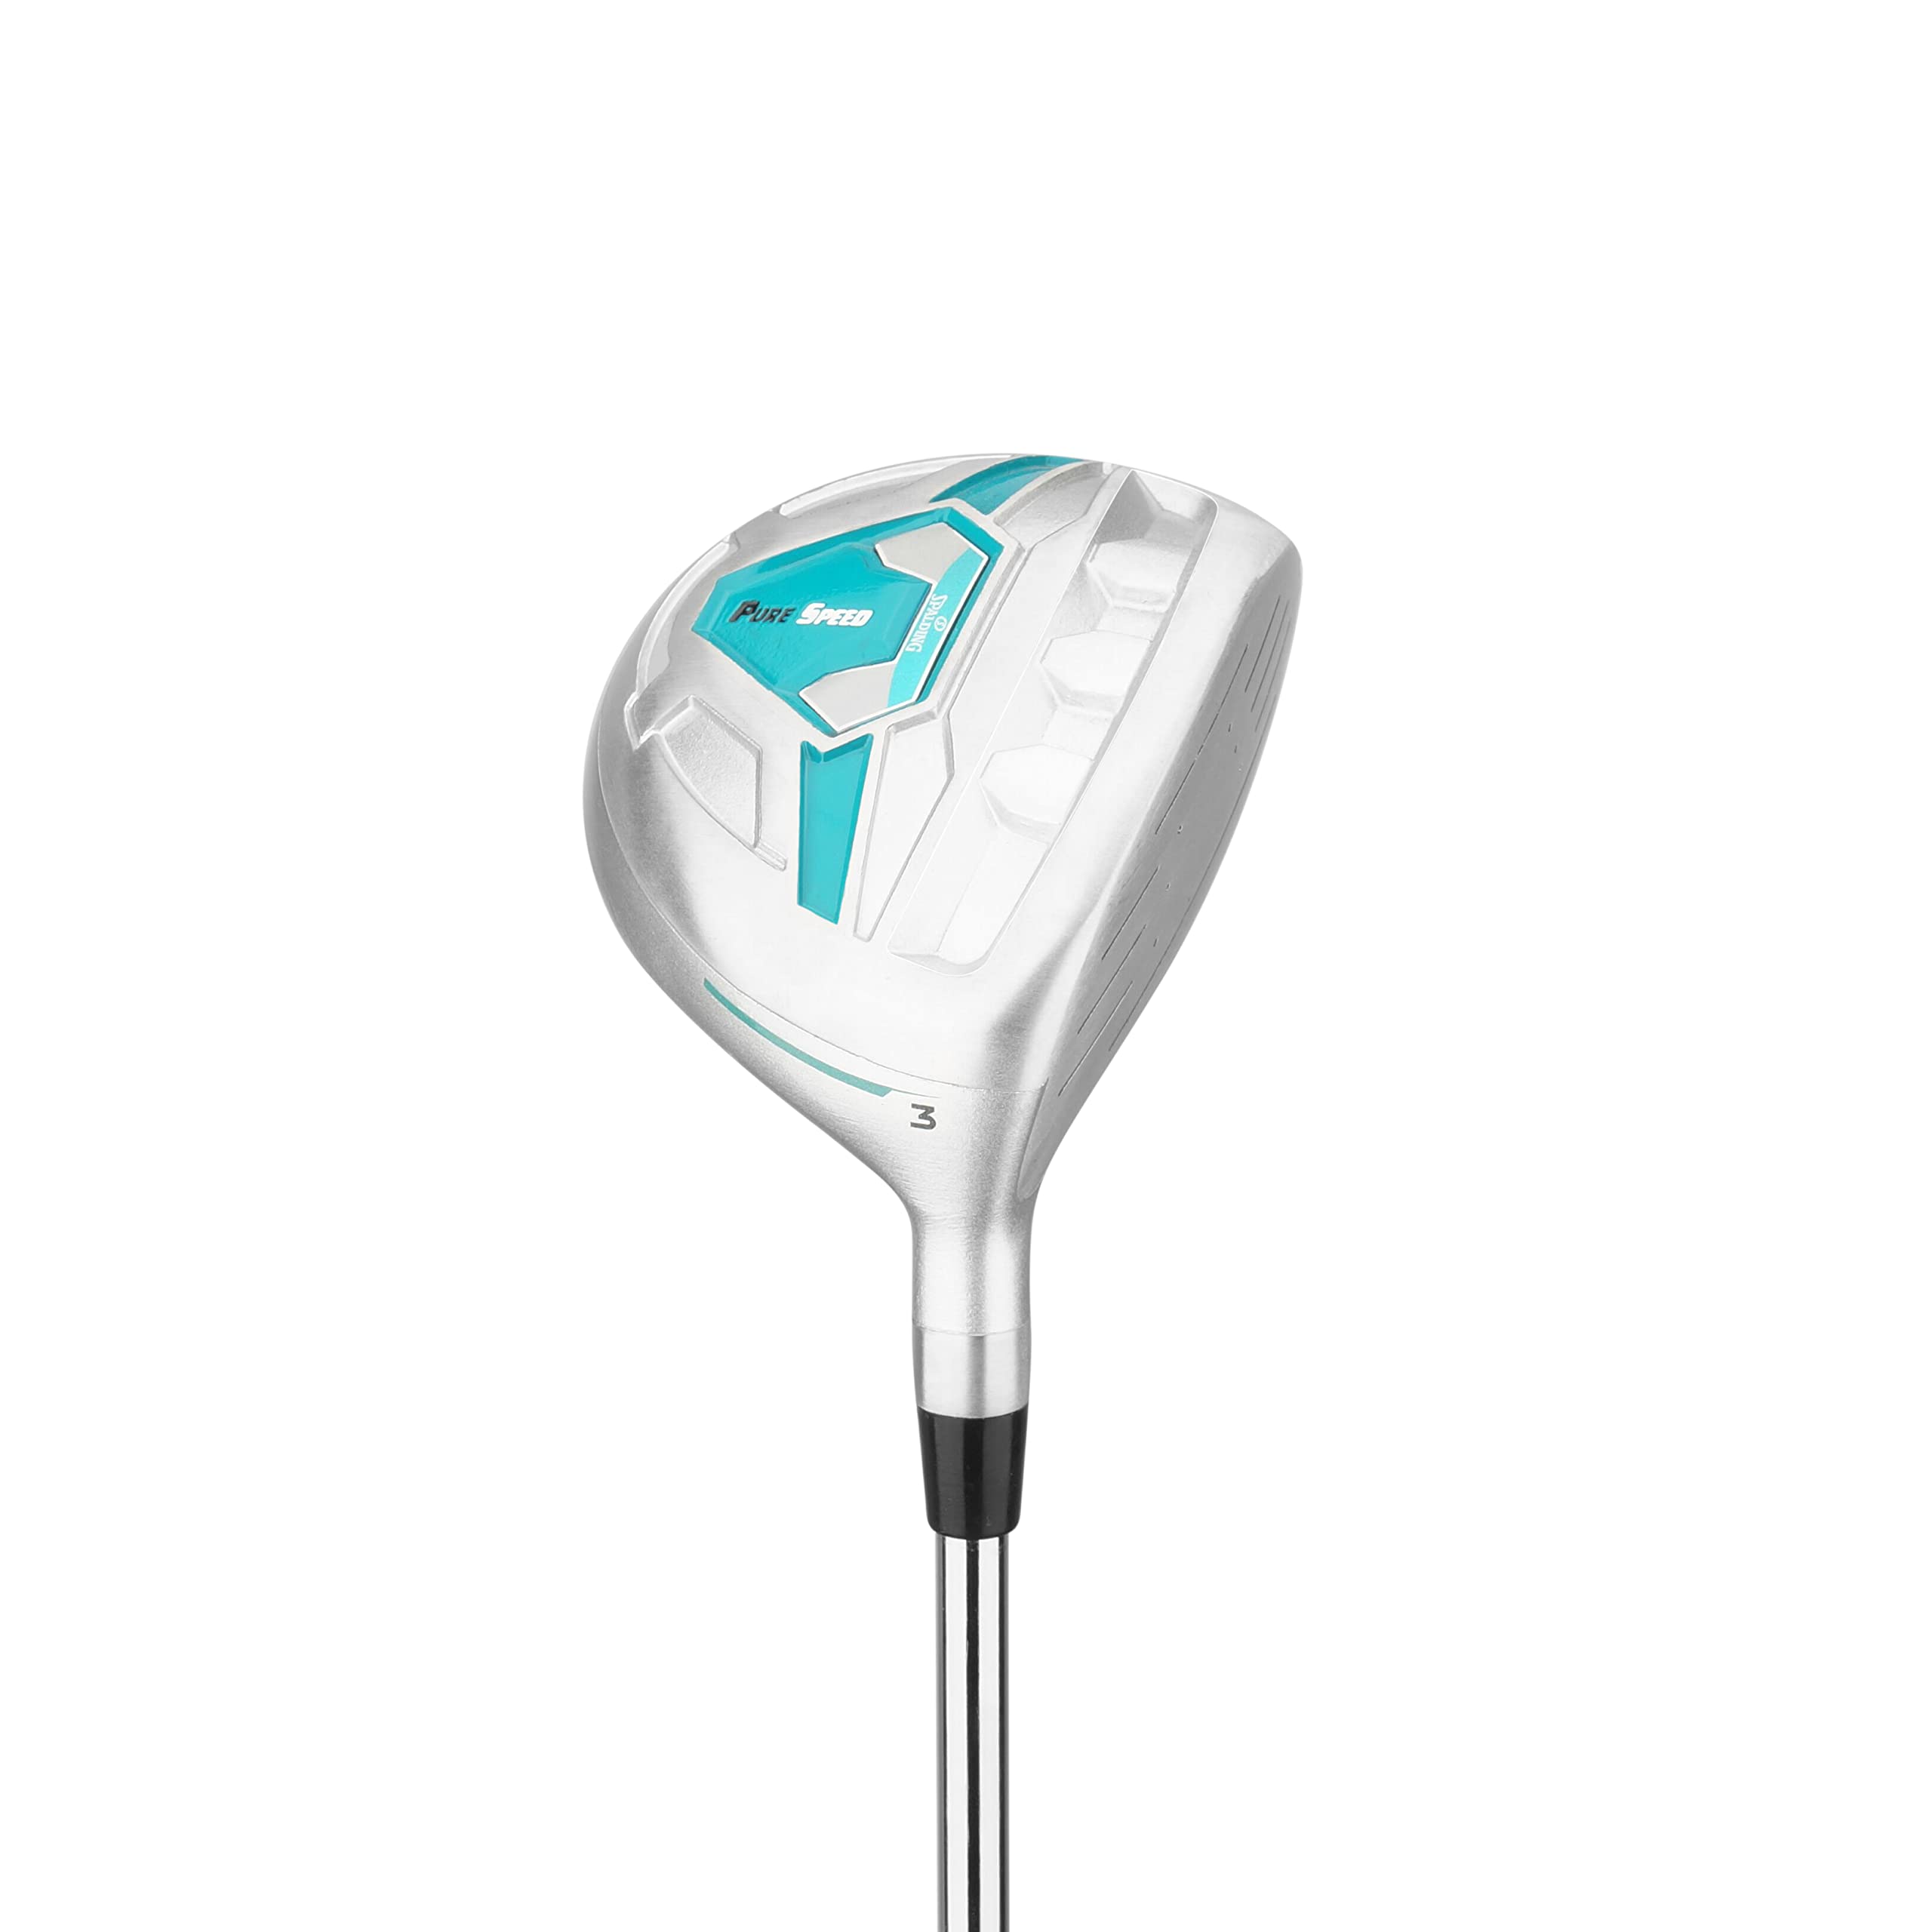 Spalding Pure Speed 14-Piece Golf Set Ladies All Graphite, Right Handed,Teal / Black